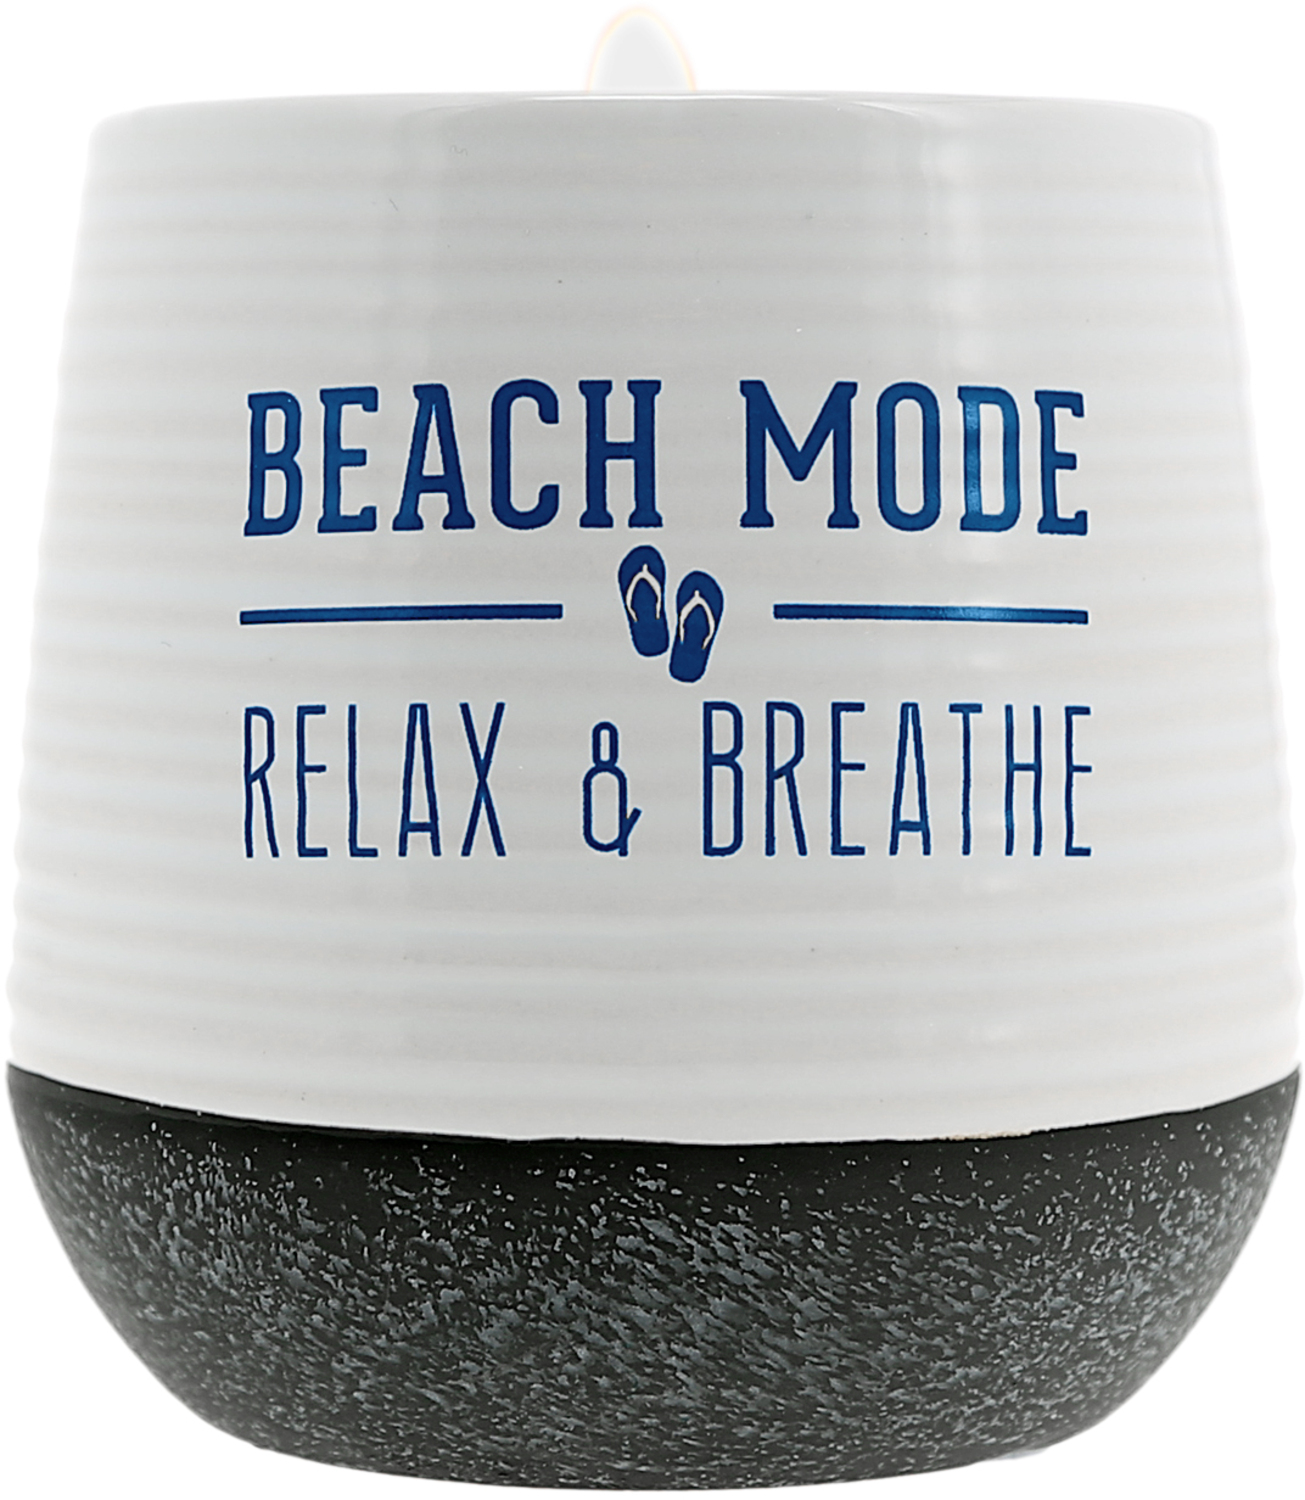 Beach Mode by We People - Beach Mode - 11 oz - 100% Soy Wax Reveal Candle
Scent: Serenity